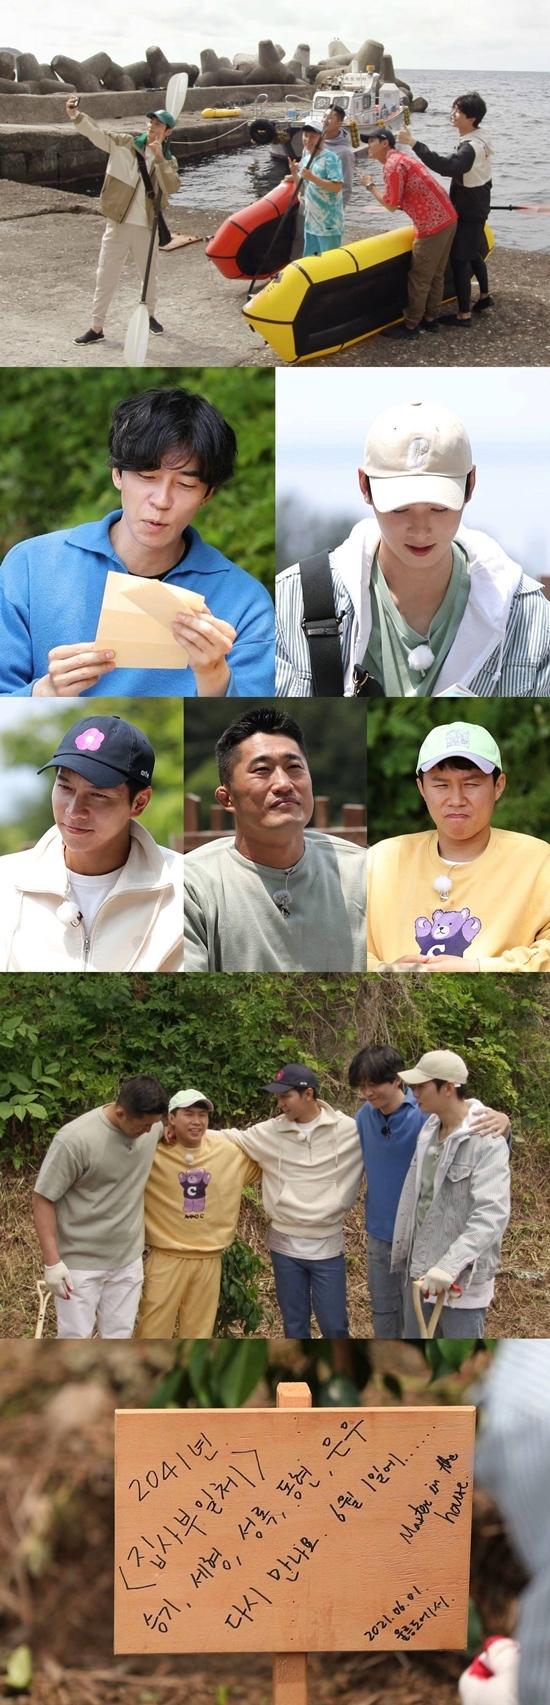 All The Butlers Cha Eun-woo and Shin Sung-roks farewell trip are on the air.On the 20th, SBS entertainment program All The Butlers will reveal the last five members memories with Cha Eun-woo and Shin Sung-rok.On this day, the last trip of five men saying goodbye to Ulleungdo who met Master Lee Jang-hee will be held.The members took memories as usual, such as taking selfies together in Ulleungdo, taking away the opponents oars while watching the scenery while taking kayaks.The members who had friendship for nearly two years had time to talk about their hearts.The members who realized that it was the last trip did not easily speak at first, but then they conveyed their sincerity to each other through honest stories.In particular, Shin Sung-rok and Cha Eun-woo told the members that they did not feel real and I will be a brother who others can not have. In addition, Cha Eun-woo prepared a time capsule to commemorate his last trip with his brothers; so the members buried the time capsule in Ulleungdo, promising to meet again in 2041.I am looking forward to what the precious memories of the members in the time capsule will be.The memorable trip with the last of the five members of All The Butlers will be unveiled at All The Butlers on this day.